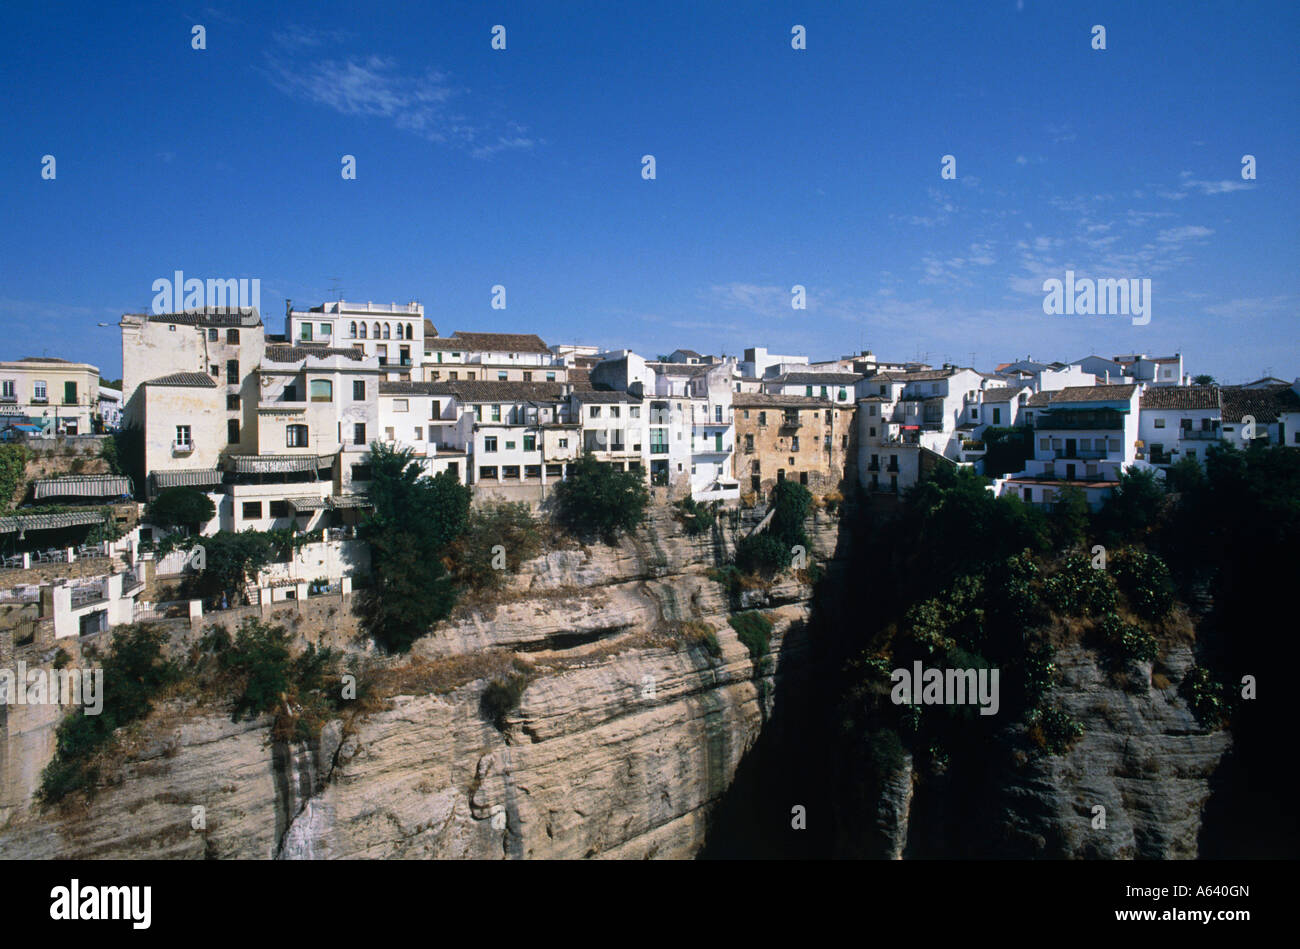 canyon of guadalevin or el tajo town of ronda region of andalucia province of malaga spain Stock Photo